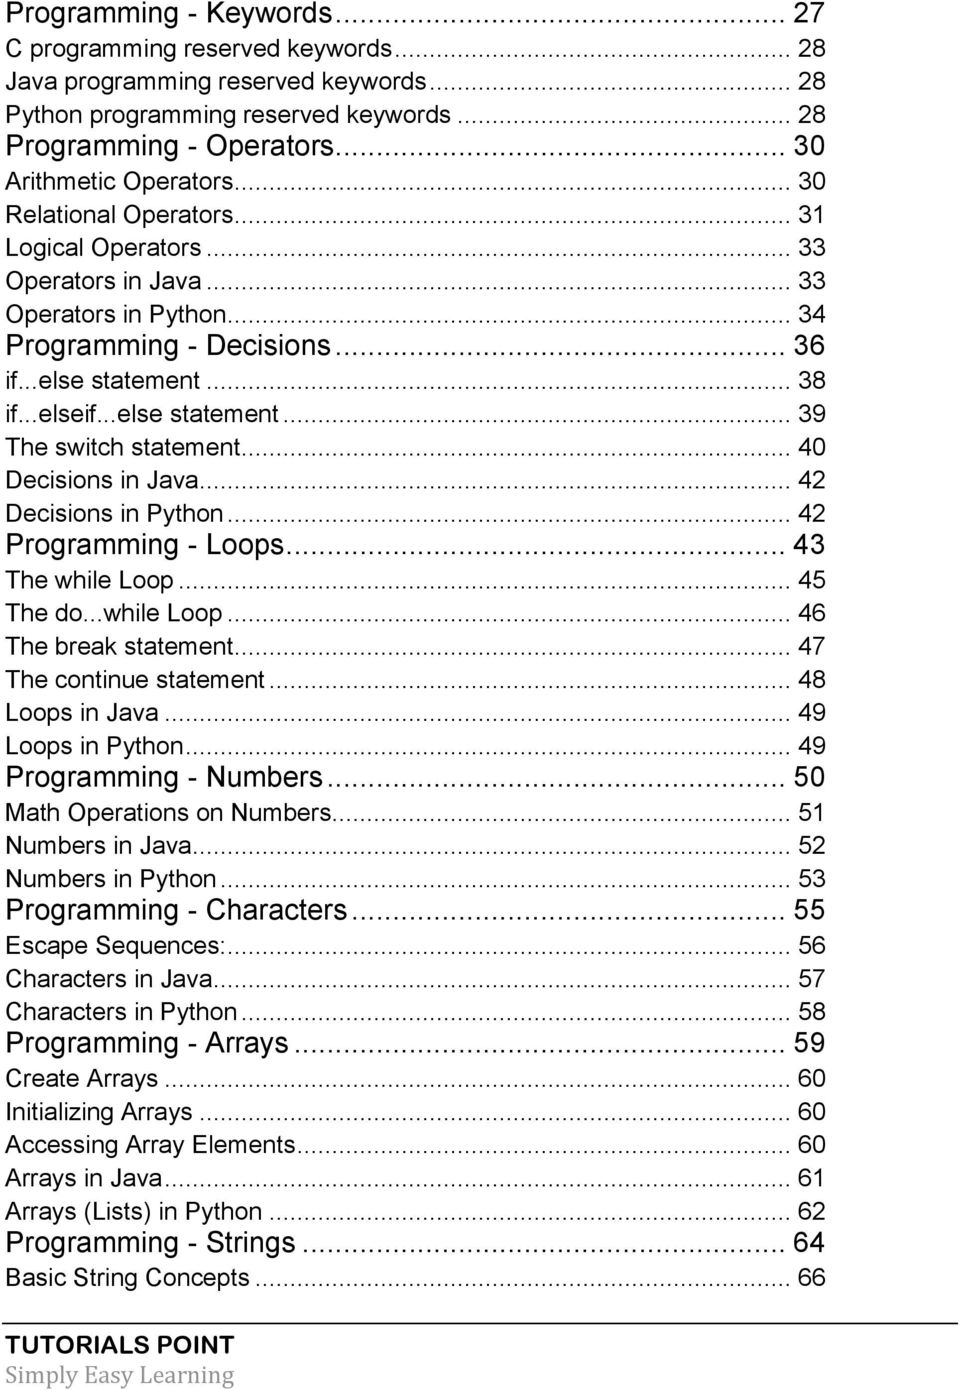 .. 40 Decisions in Java... 42 Decisions in Python... 42 Programming - Loops... 43 The while Loop... 45 The do...while Loop... 46 The break statement... 47 The continue statement... 48 Loops in Java.